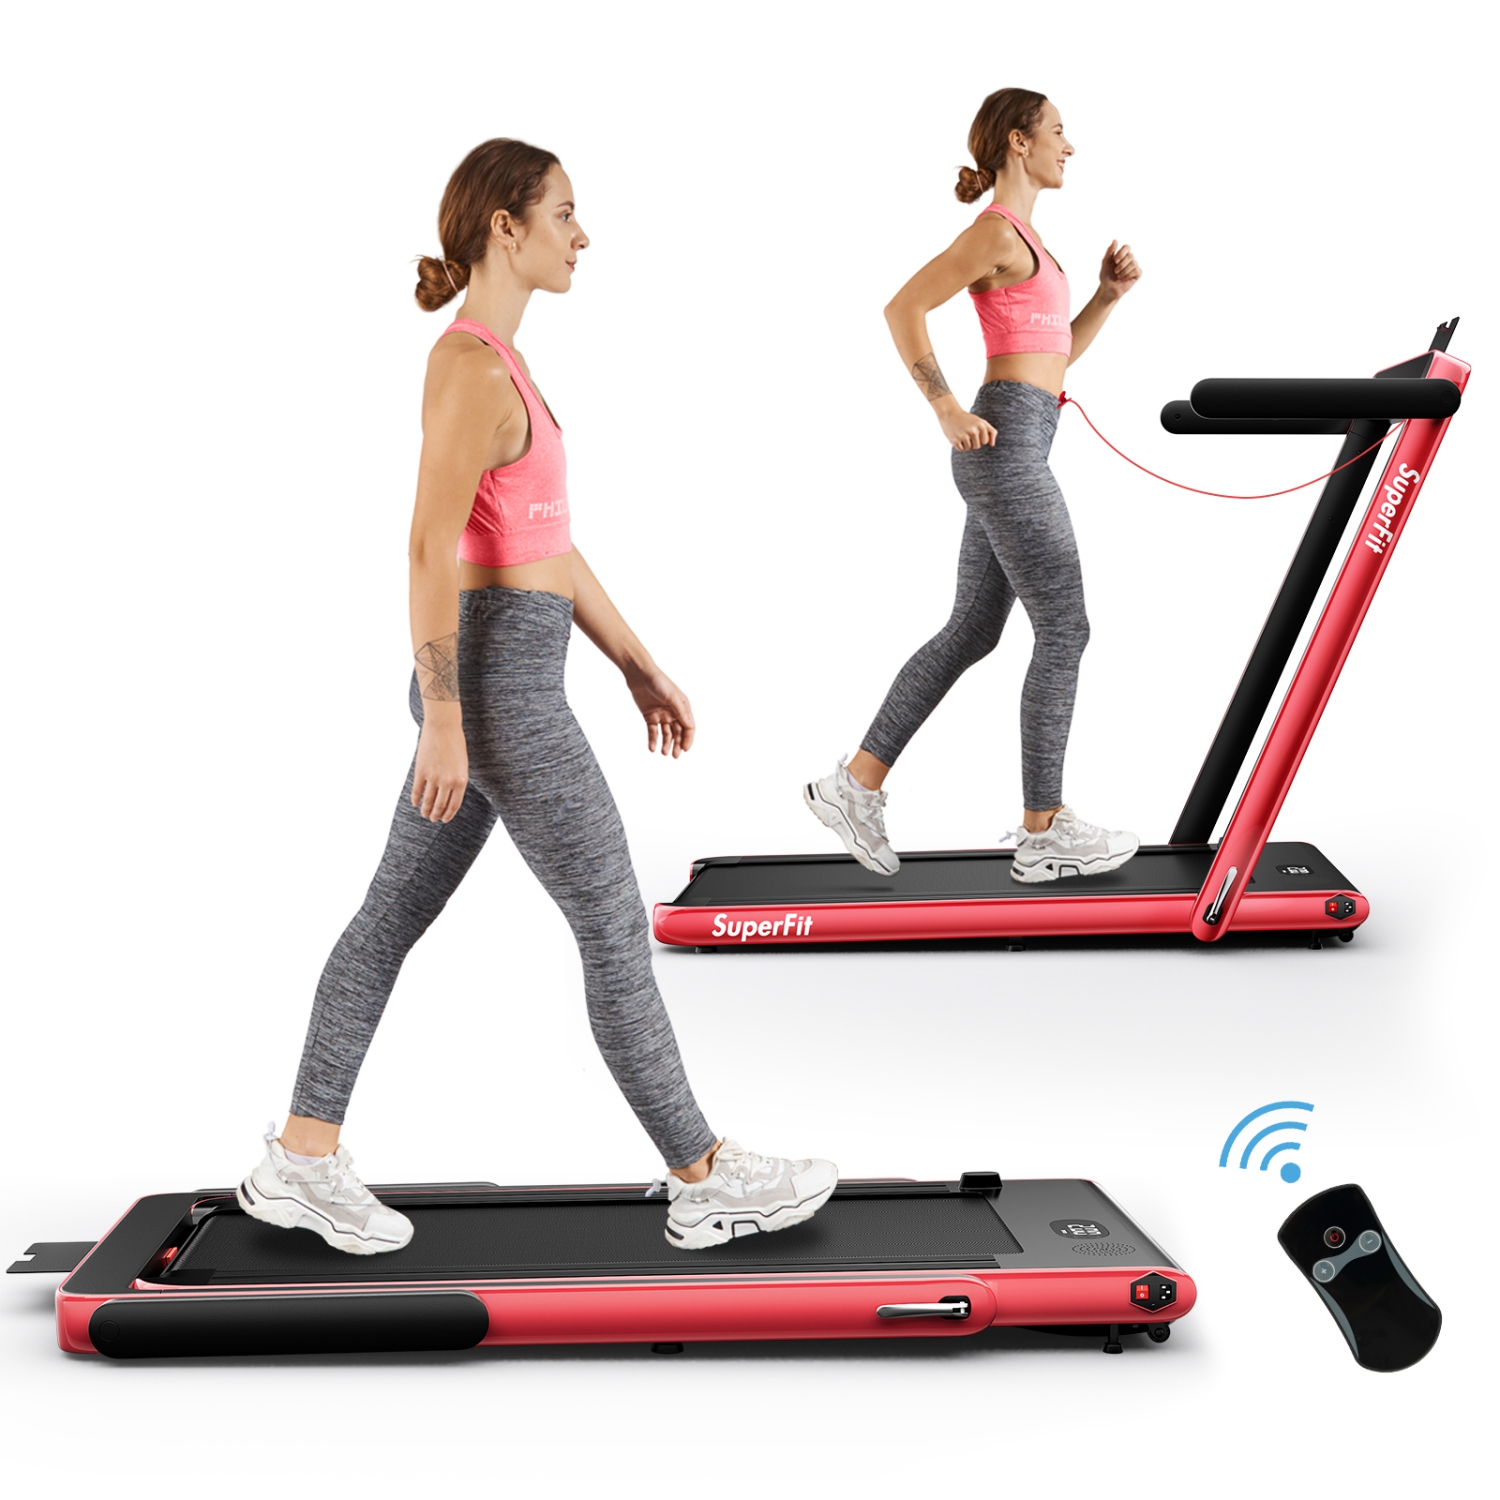 SuperFit 2.25HP 2-in-1 Folding Under-Desk Walking Pad with Remote Control & Bluetooth Speaker - Red